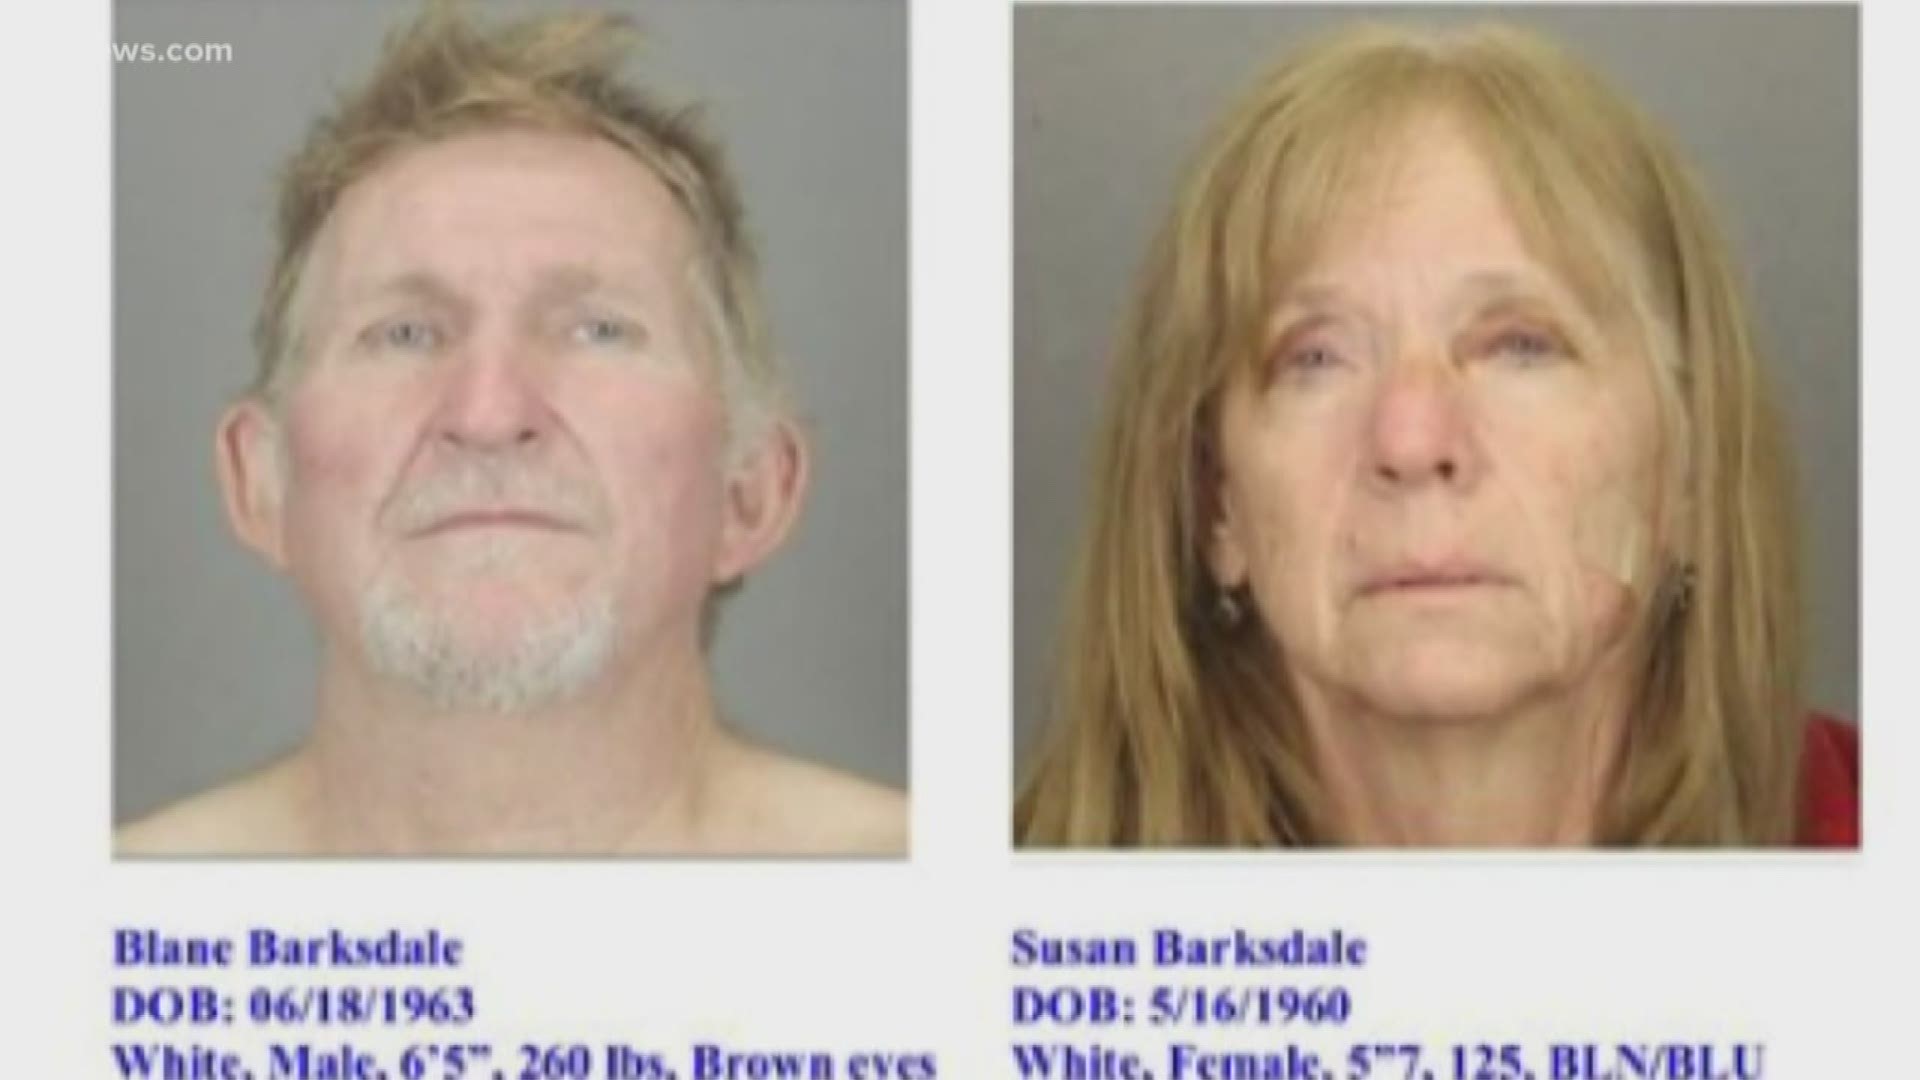 Blane and Susan Barksdale were last seen in Northeastern Arizona after their escape from a private security service that was delivering them from New York to a Tucson jail. Pima County officials said they've now suspended that security service. A former FBI profiler tells me he fears the worst from these two fugitives.